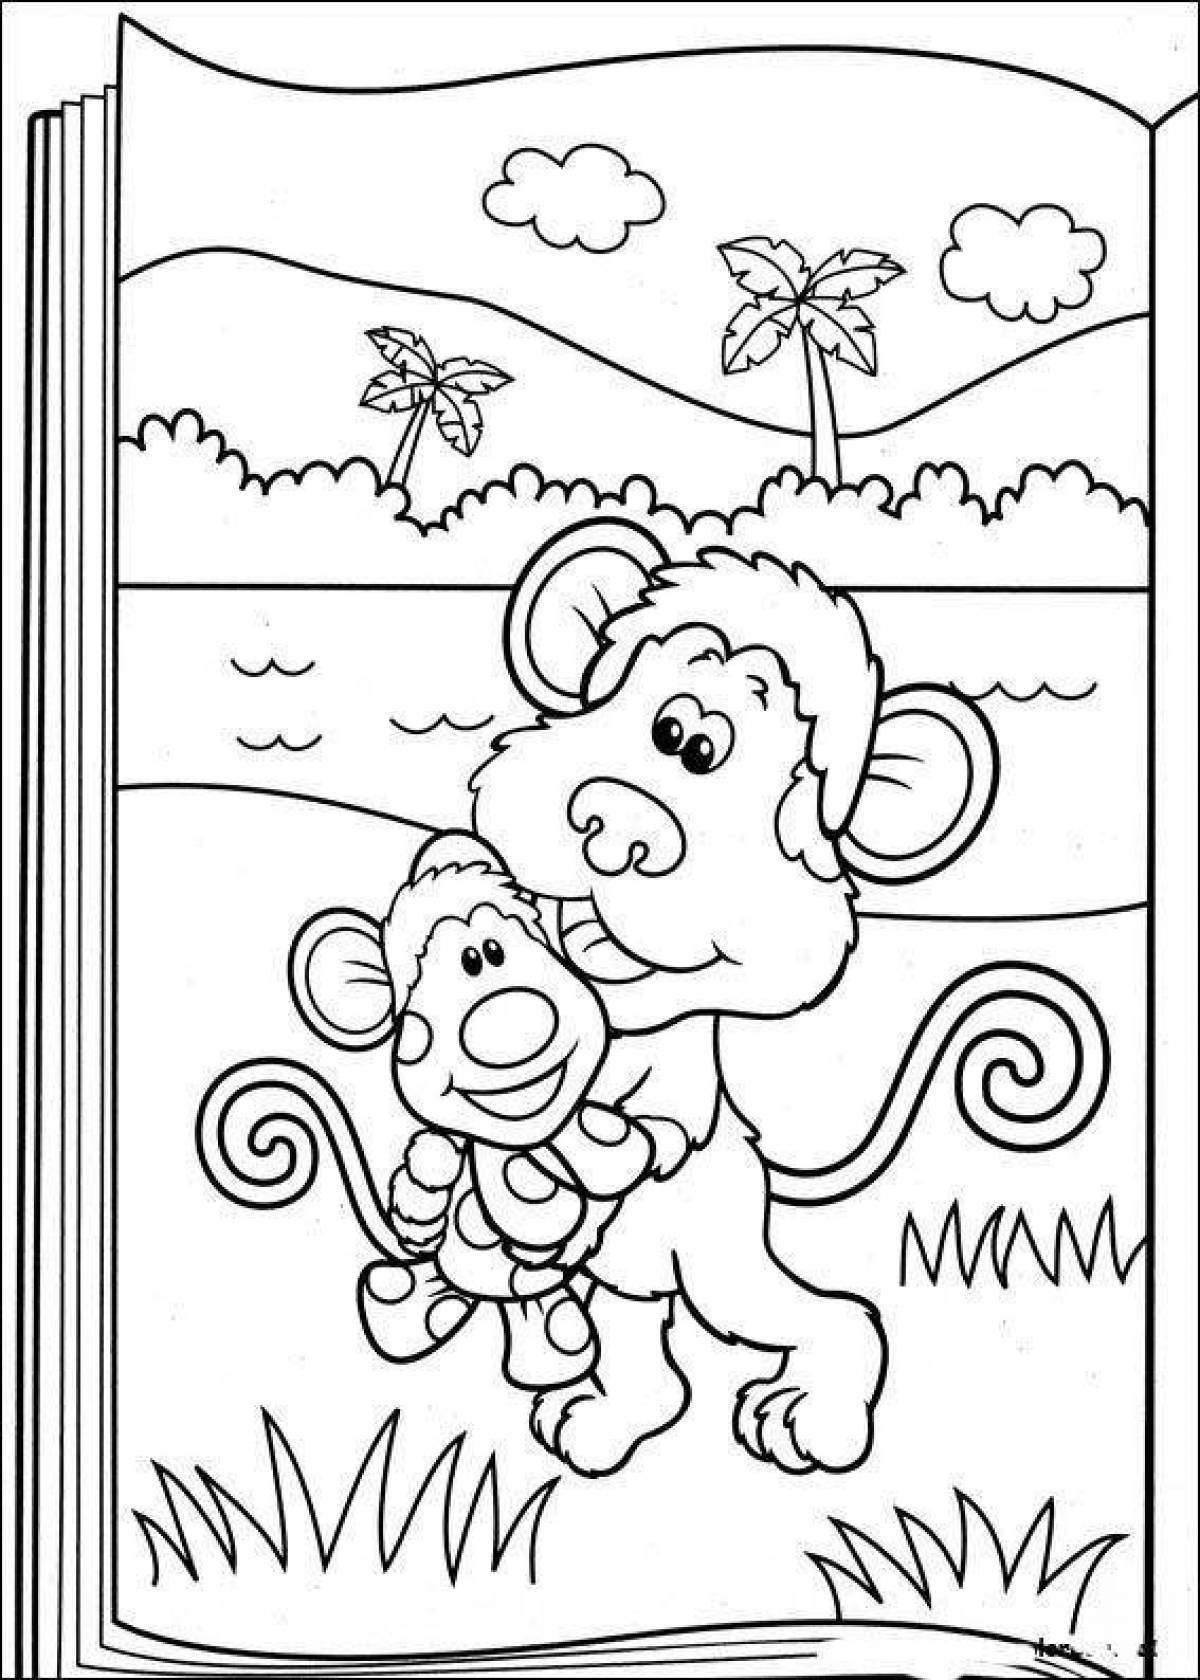 Coloring page cheerful blue friend